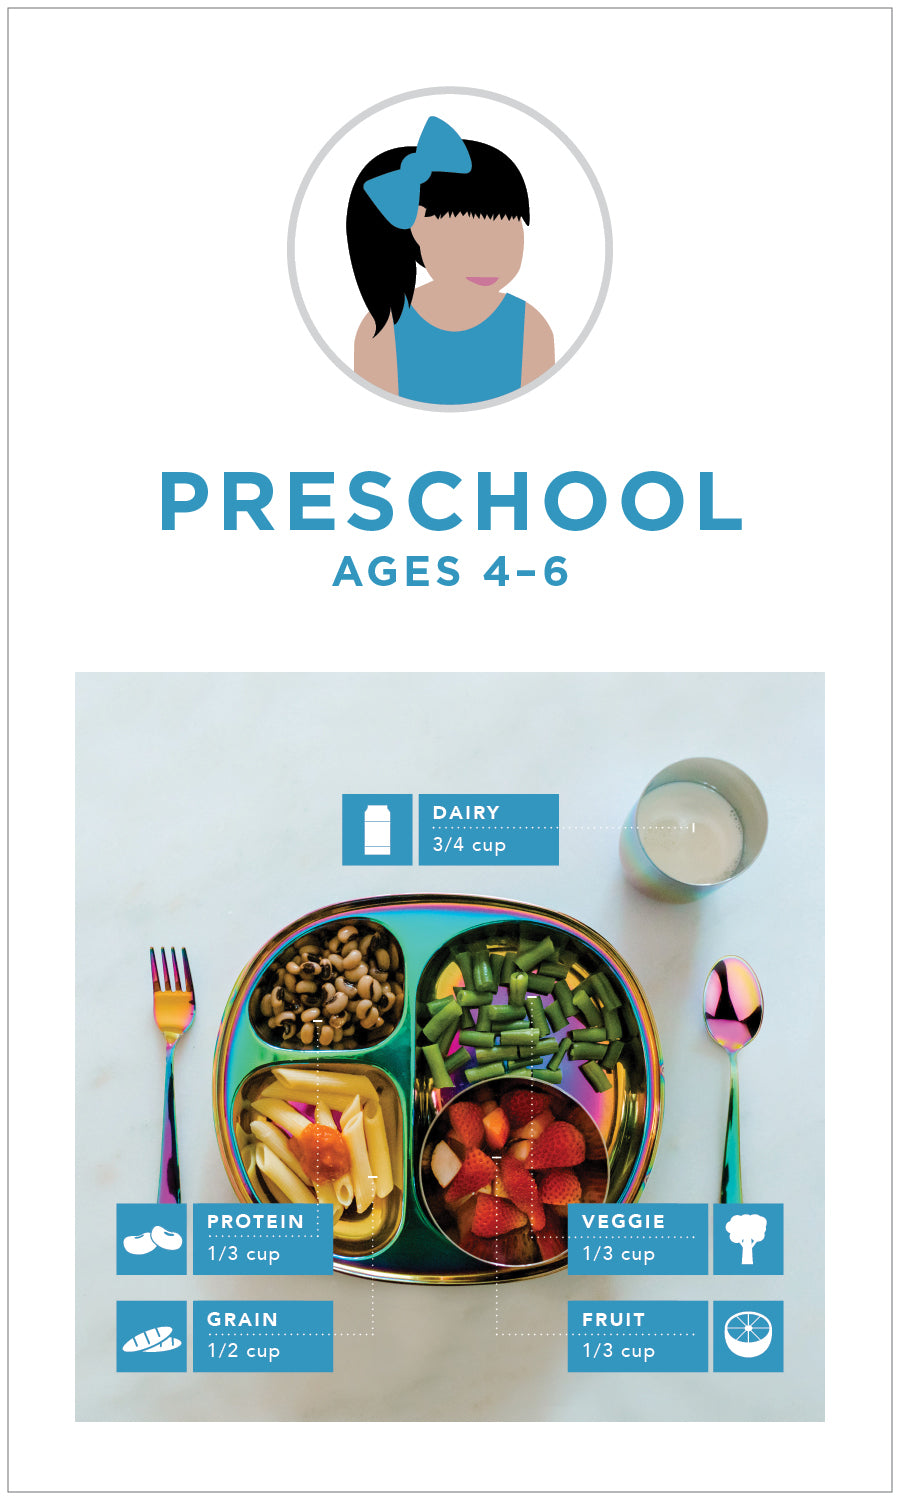 Preschool ages 4-6 Mealtime Guides - Dairy 3/4 cup, Protein 1/3 cup, Grain 1/2 cup, Veggie 1/3 cup and Fruit 1/3 cup